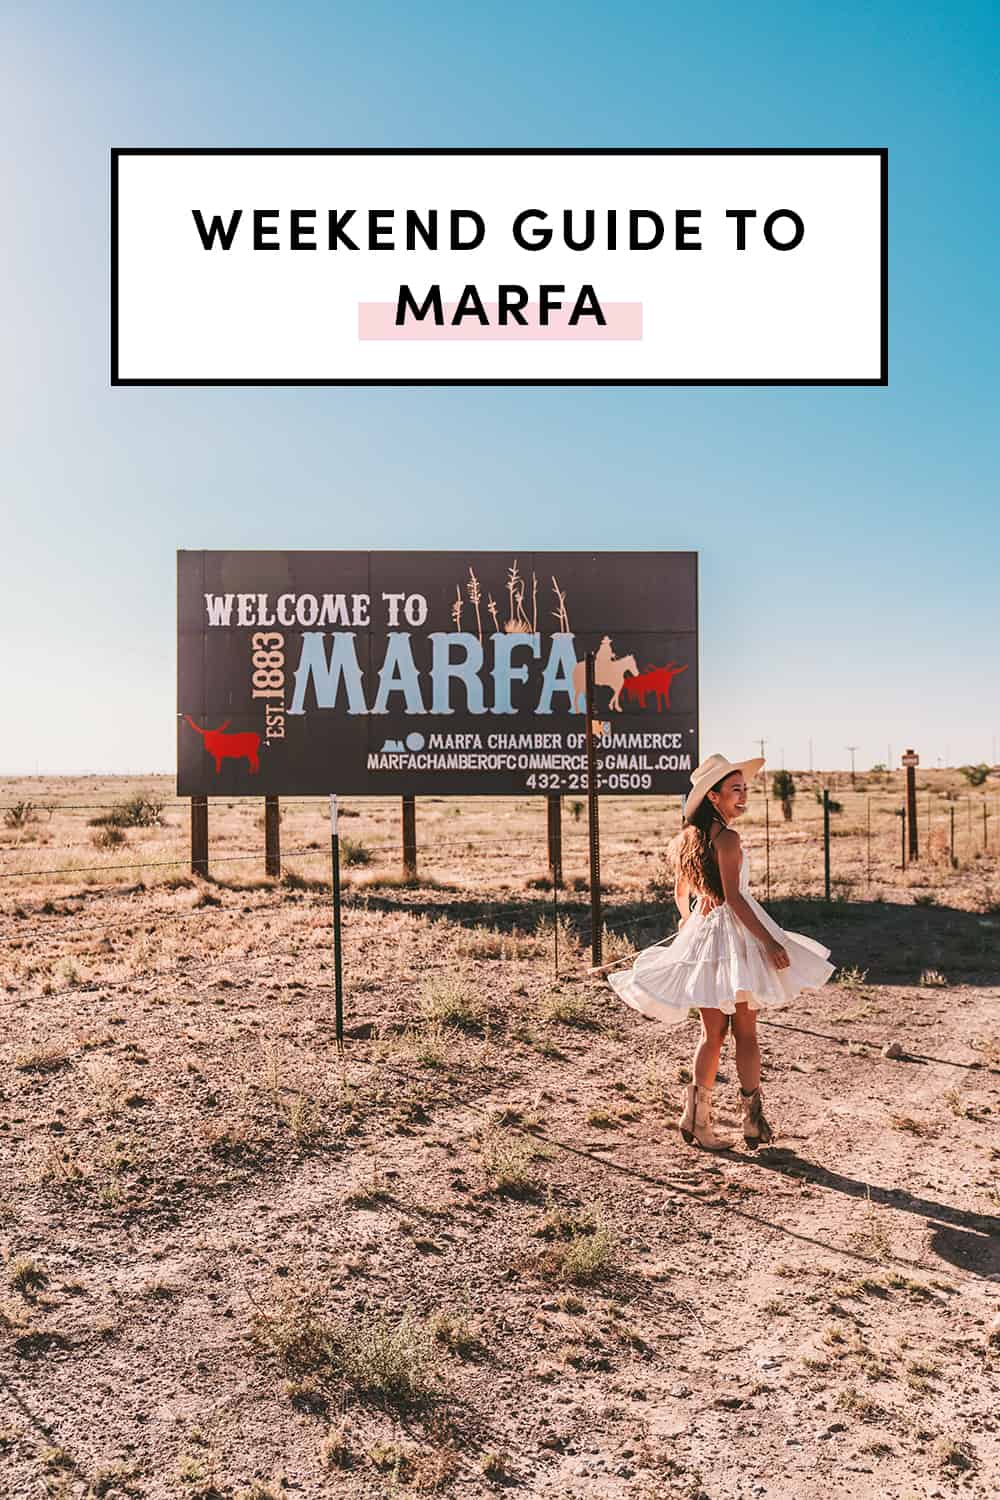 Weekend Guide To Marfa